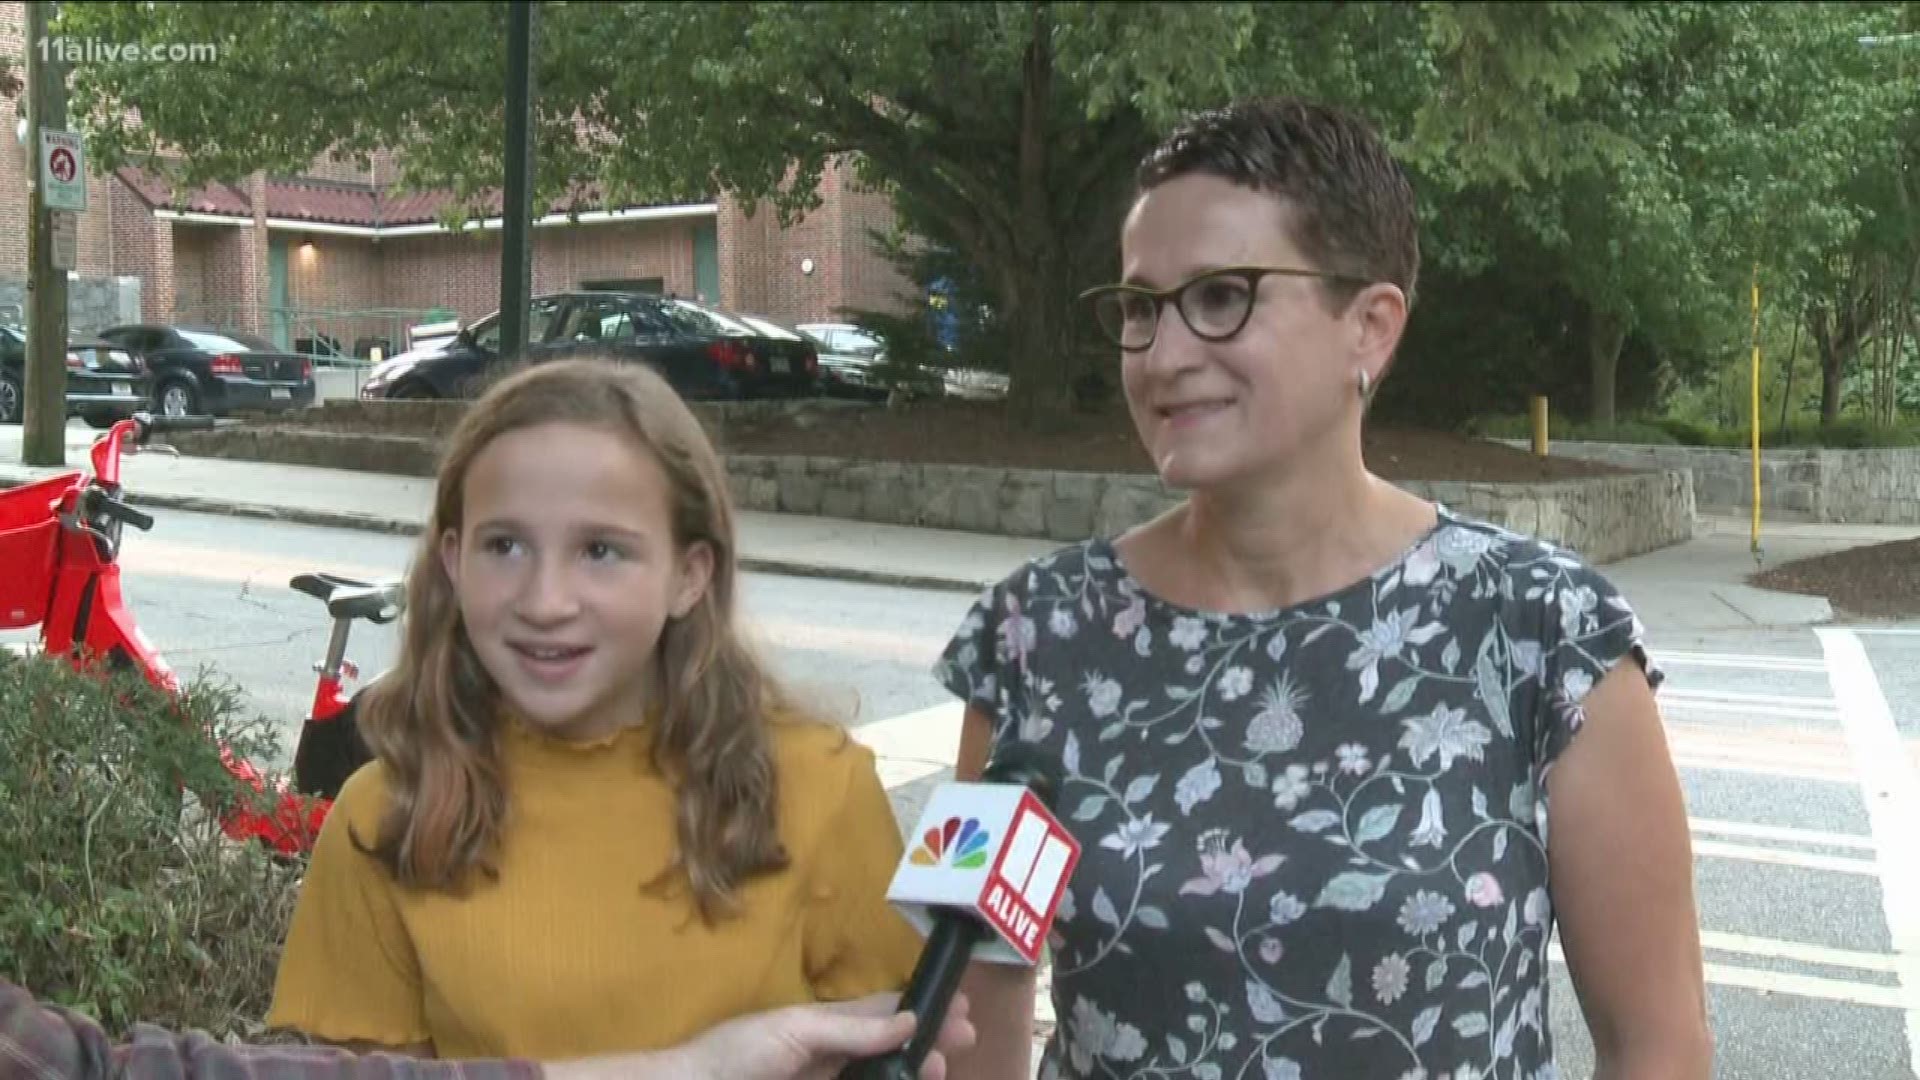 Upset parents say Inman Middle School's policy unfairly targets girls.